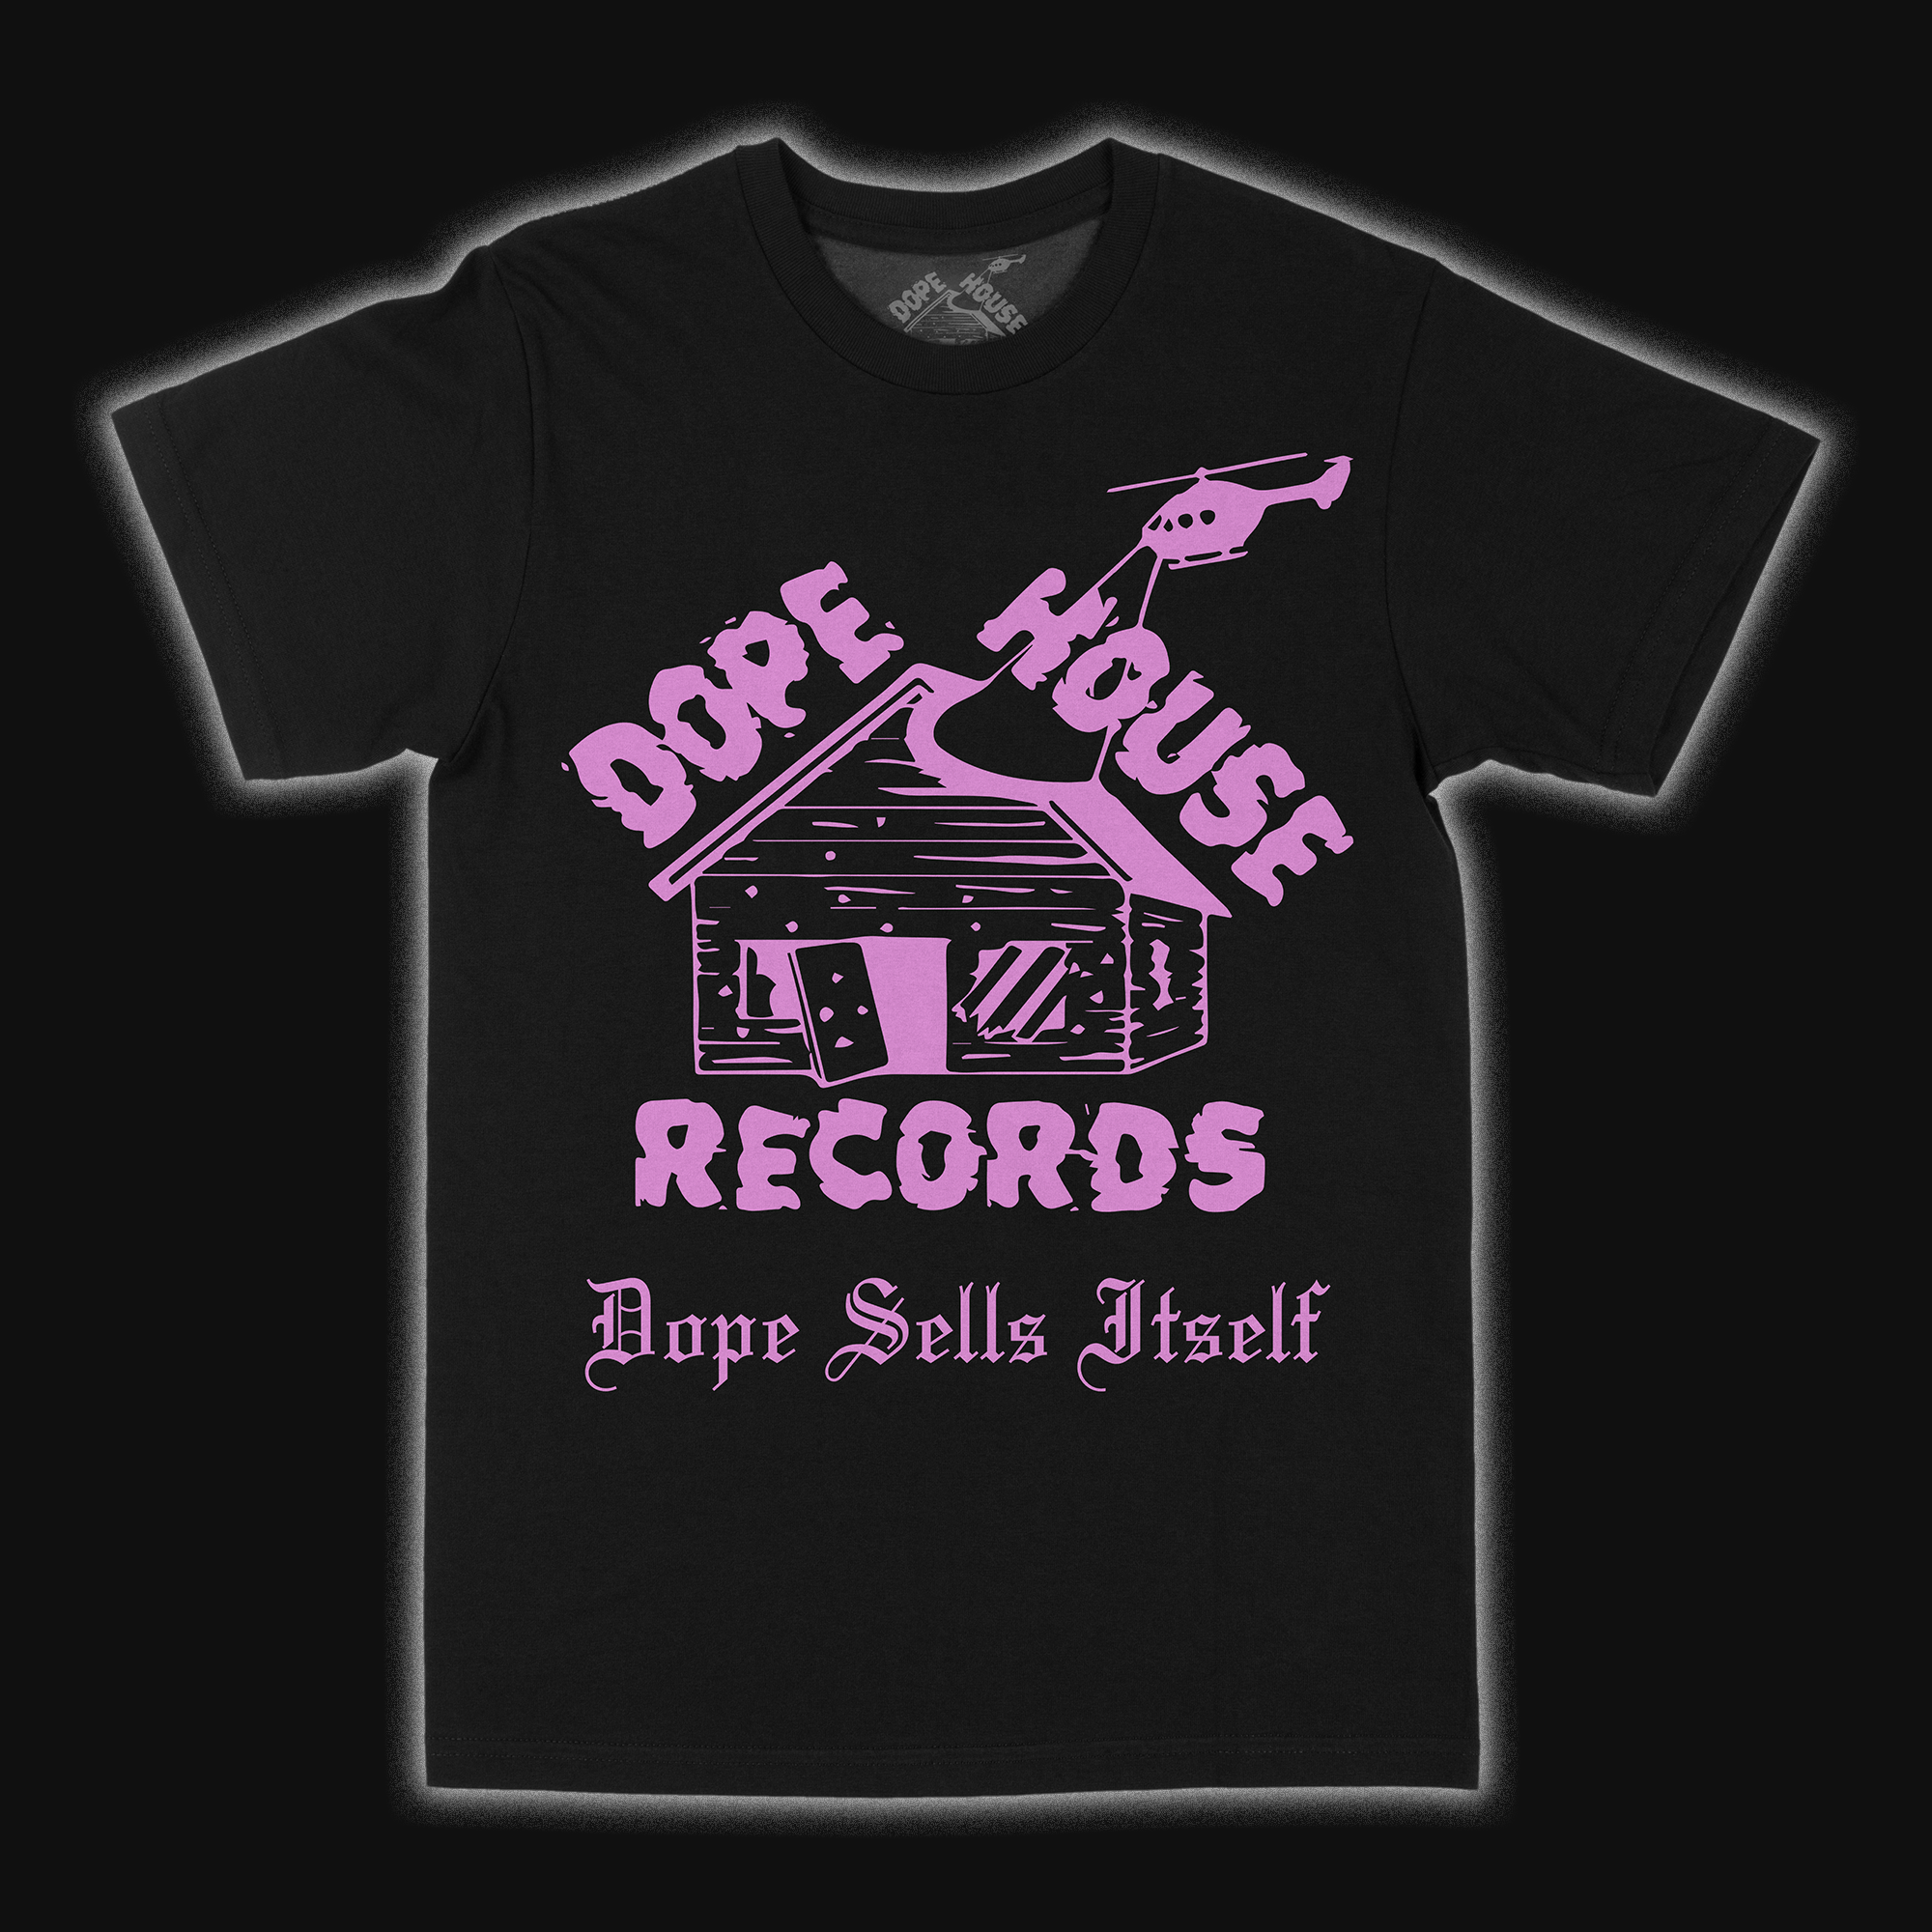 Black/Pink Logo tee - Dope House Records